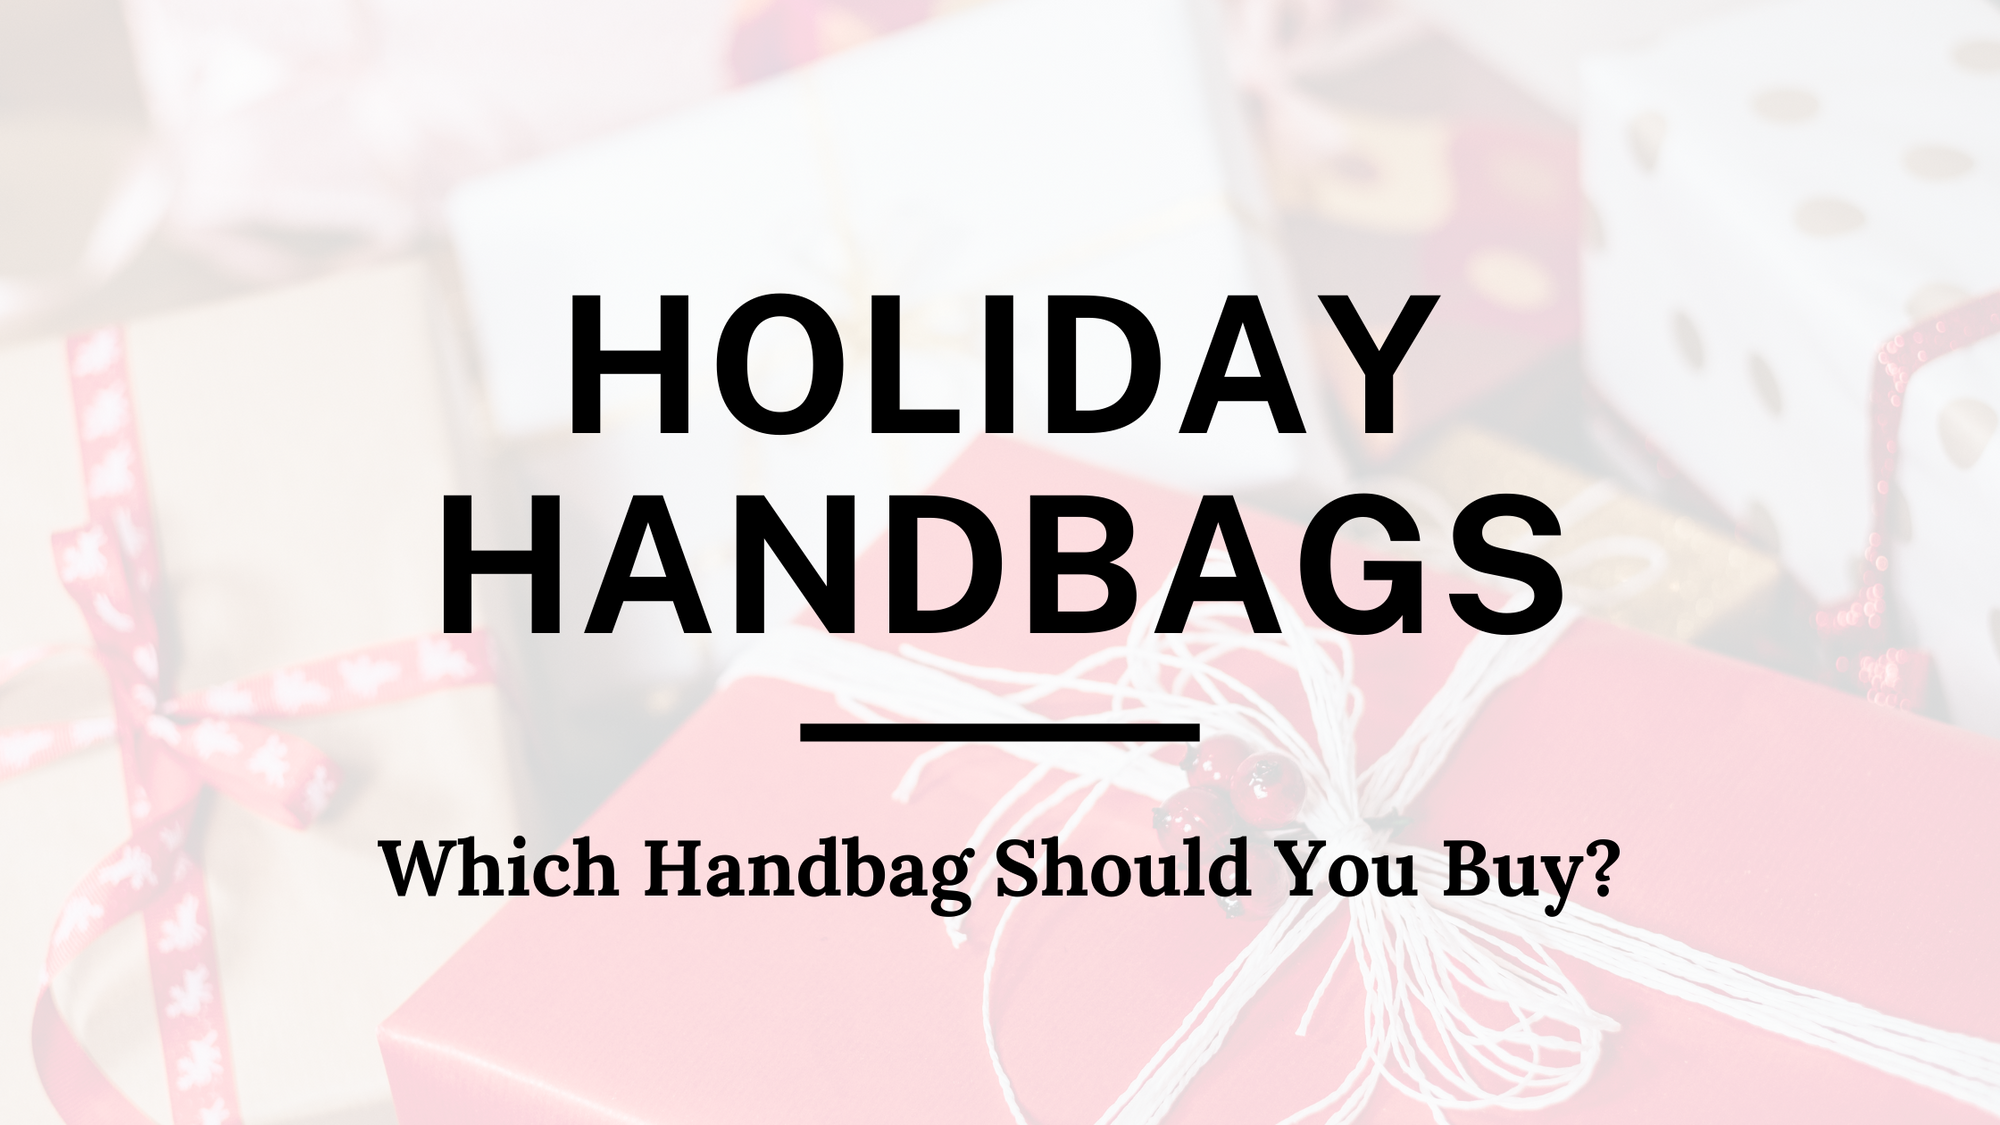 Which Handbag Should I Buy For The Holidays? (Vol. 4)